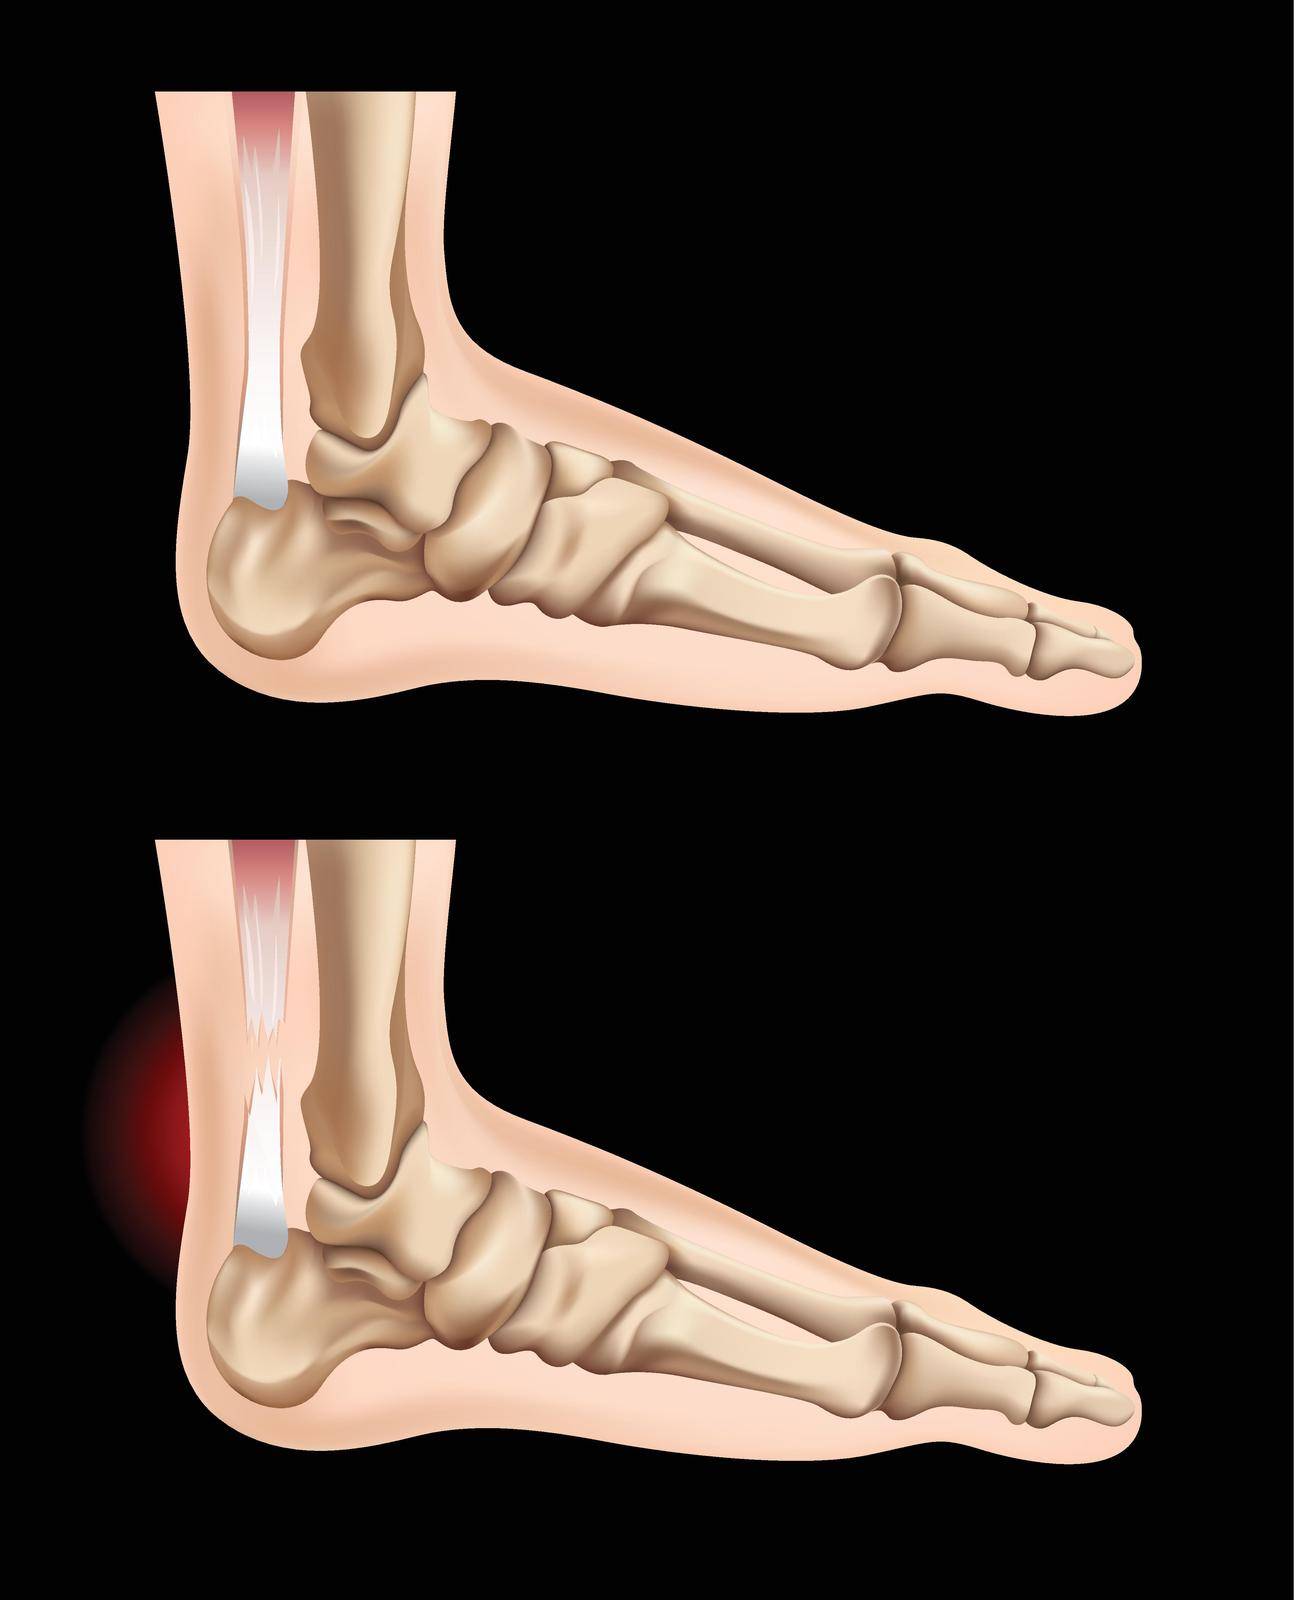 Human feet and injury in tendon by iimages